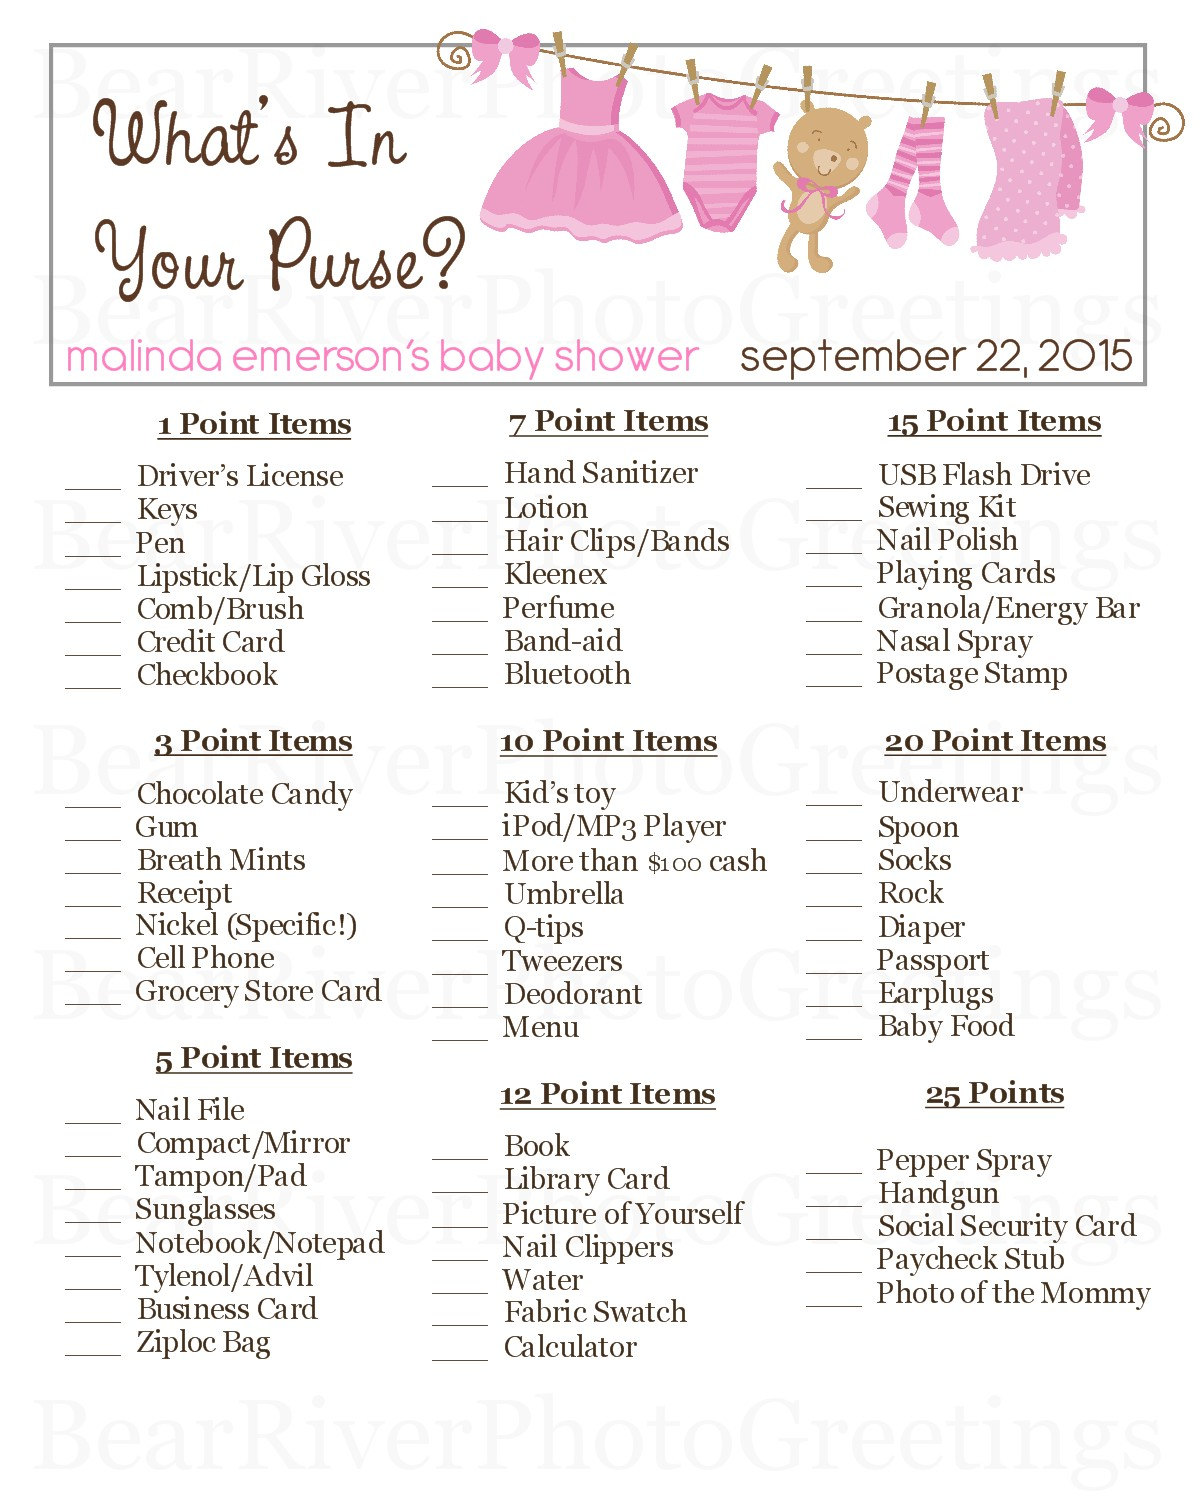 what-s-in-your-purse-baby-shower-game-printable-by-photogreetings-my